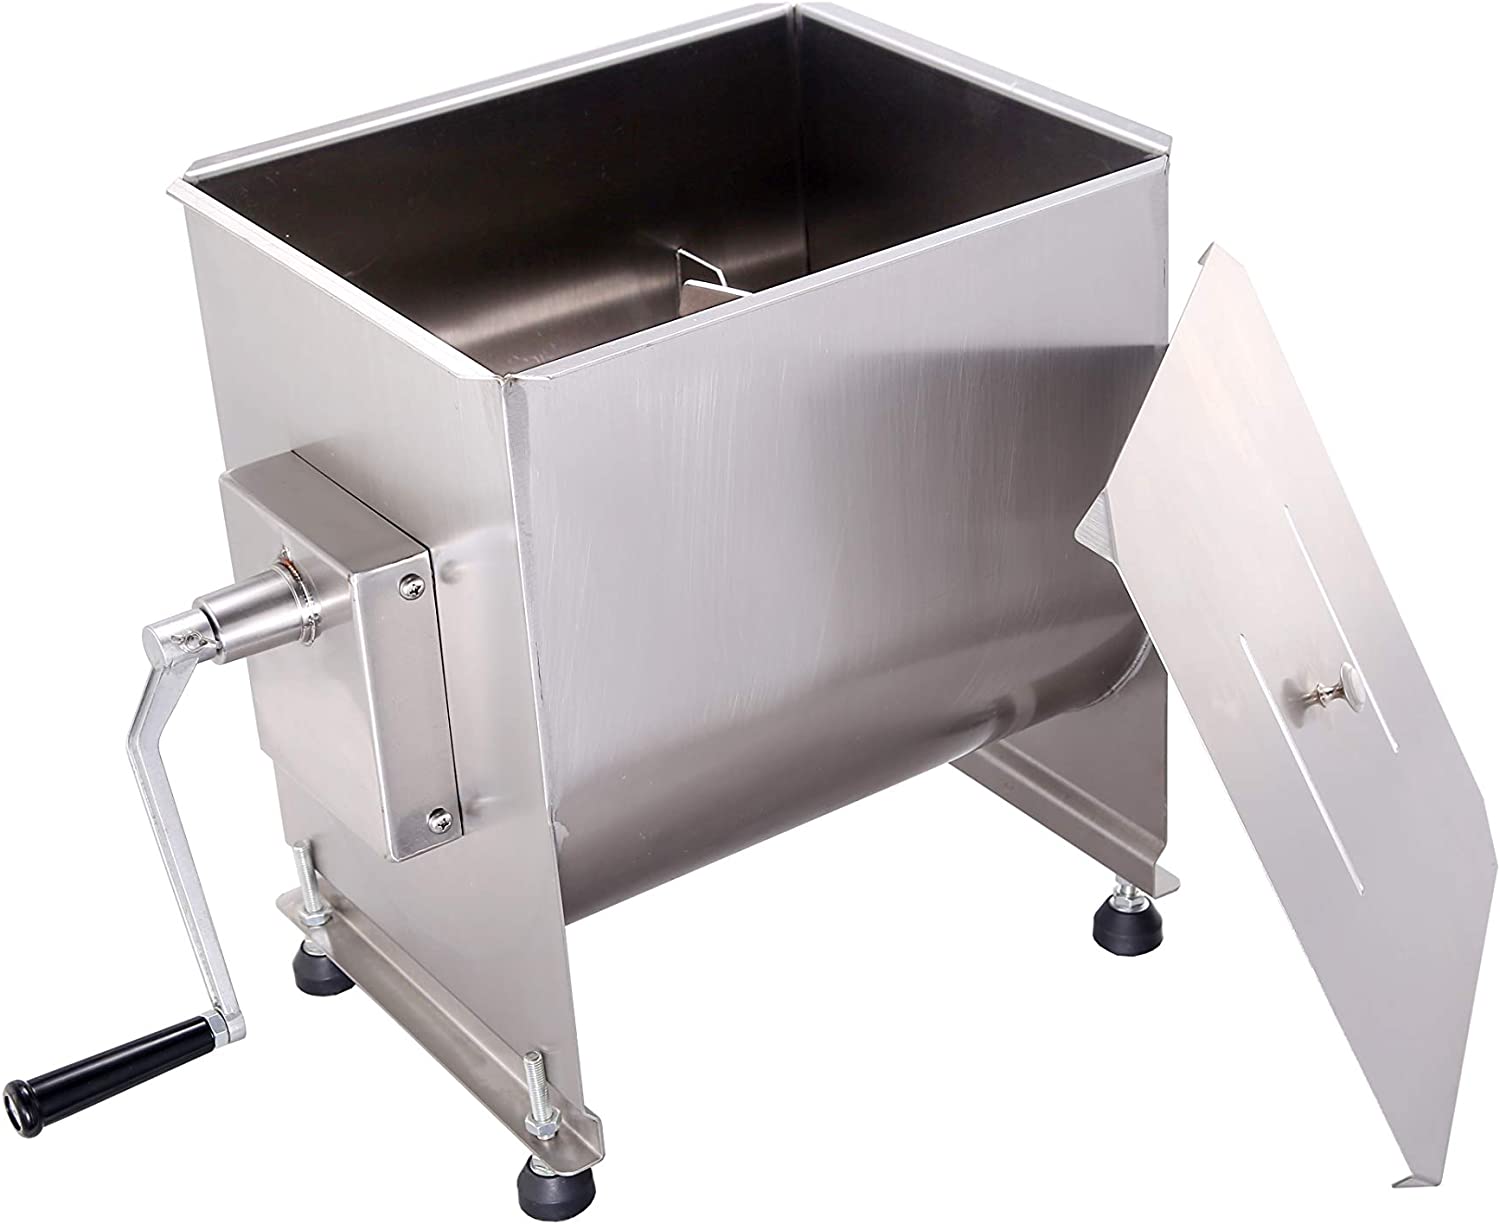  Hakka® Electric 120-Pound/60-Liter Capacity Tank Stainless  Steel Meat Mixers (Mixing Maximum 90-Pound for Meat). : Home & Kitchen